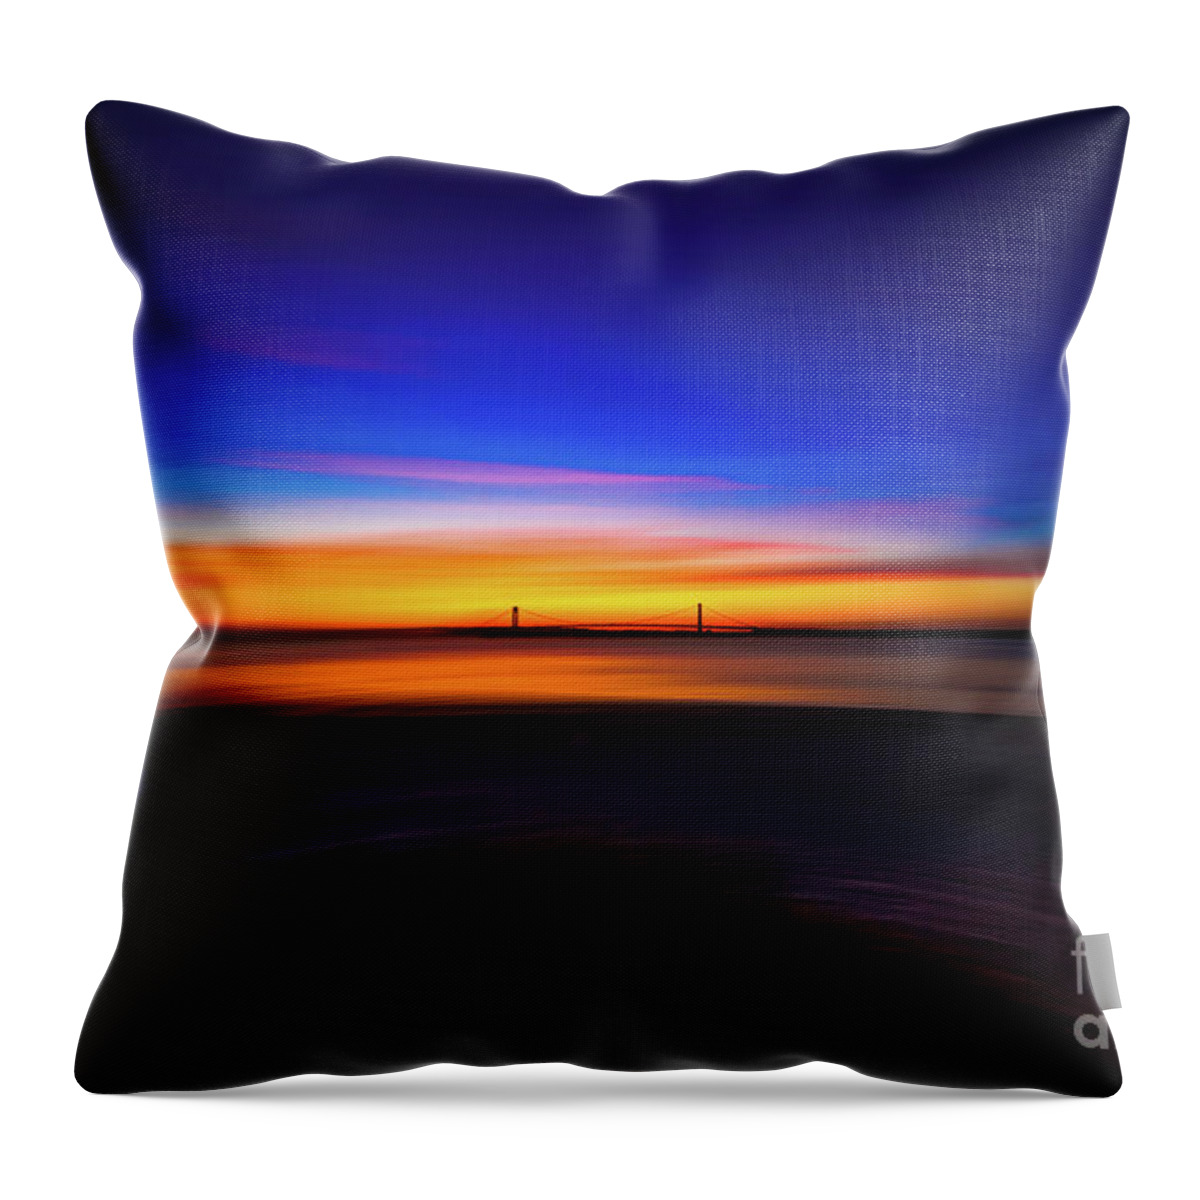 2020 Throw Pillow featuring the mixed media Burning Bridge by Stef Ko